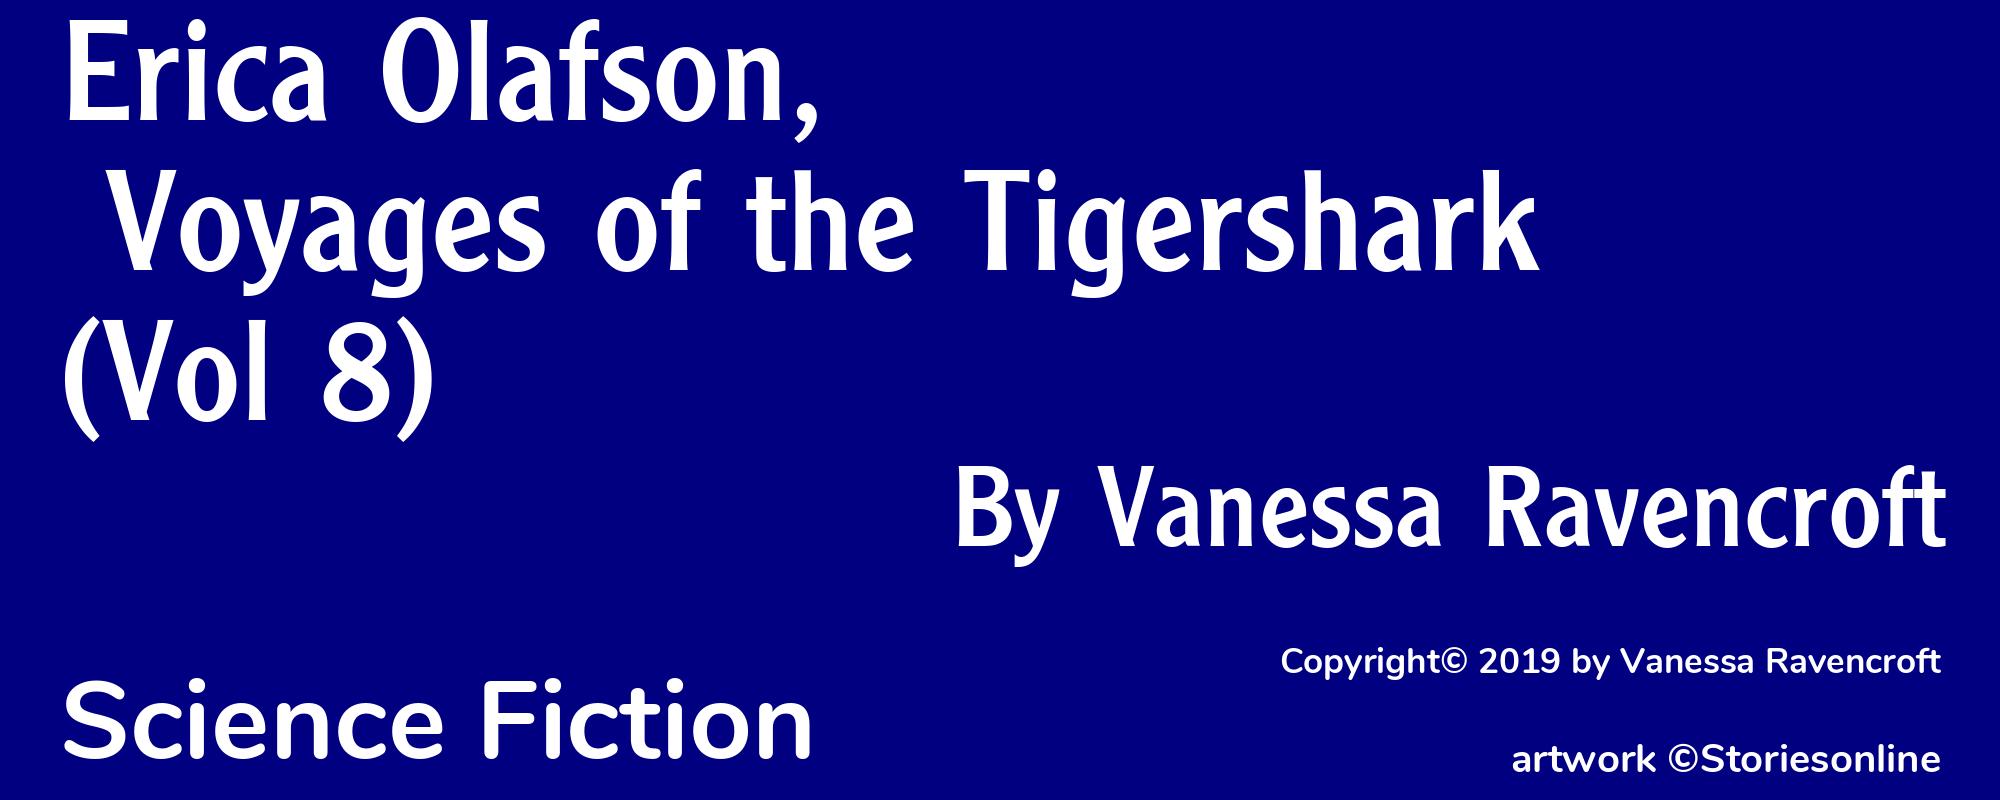 Erica Olafson, Voyages of the Tigershark (Vol 8) - Cover